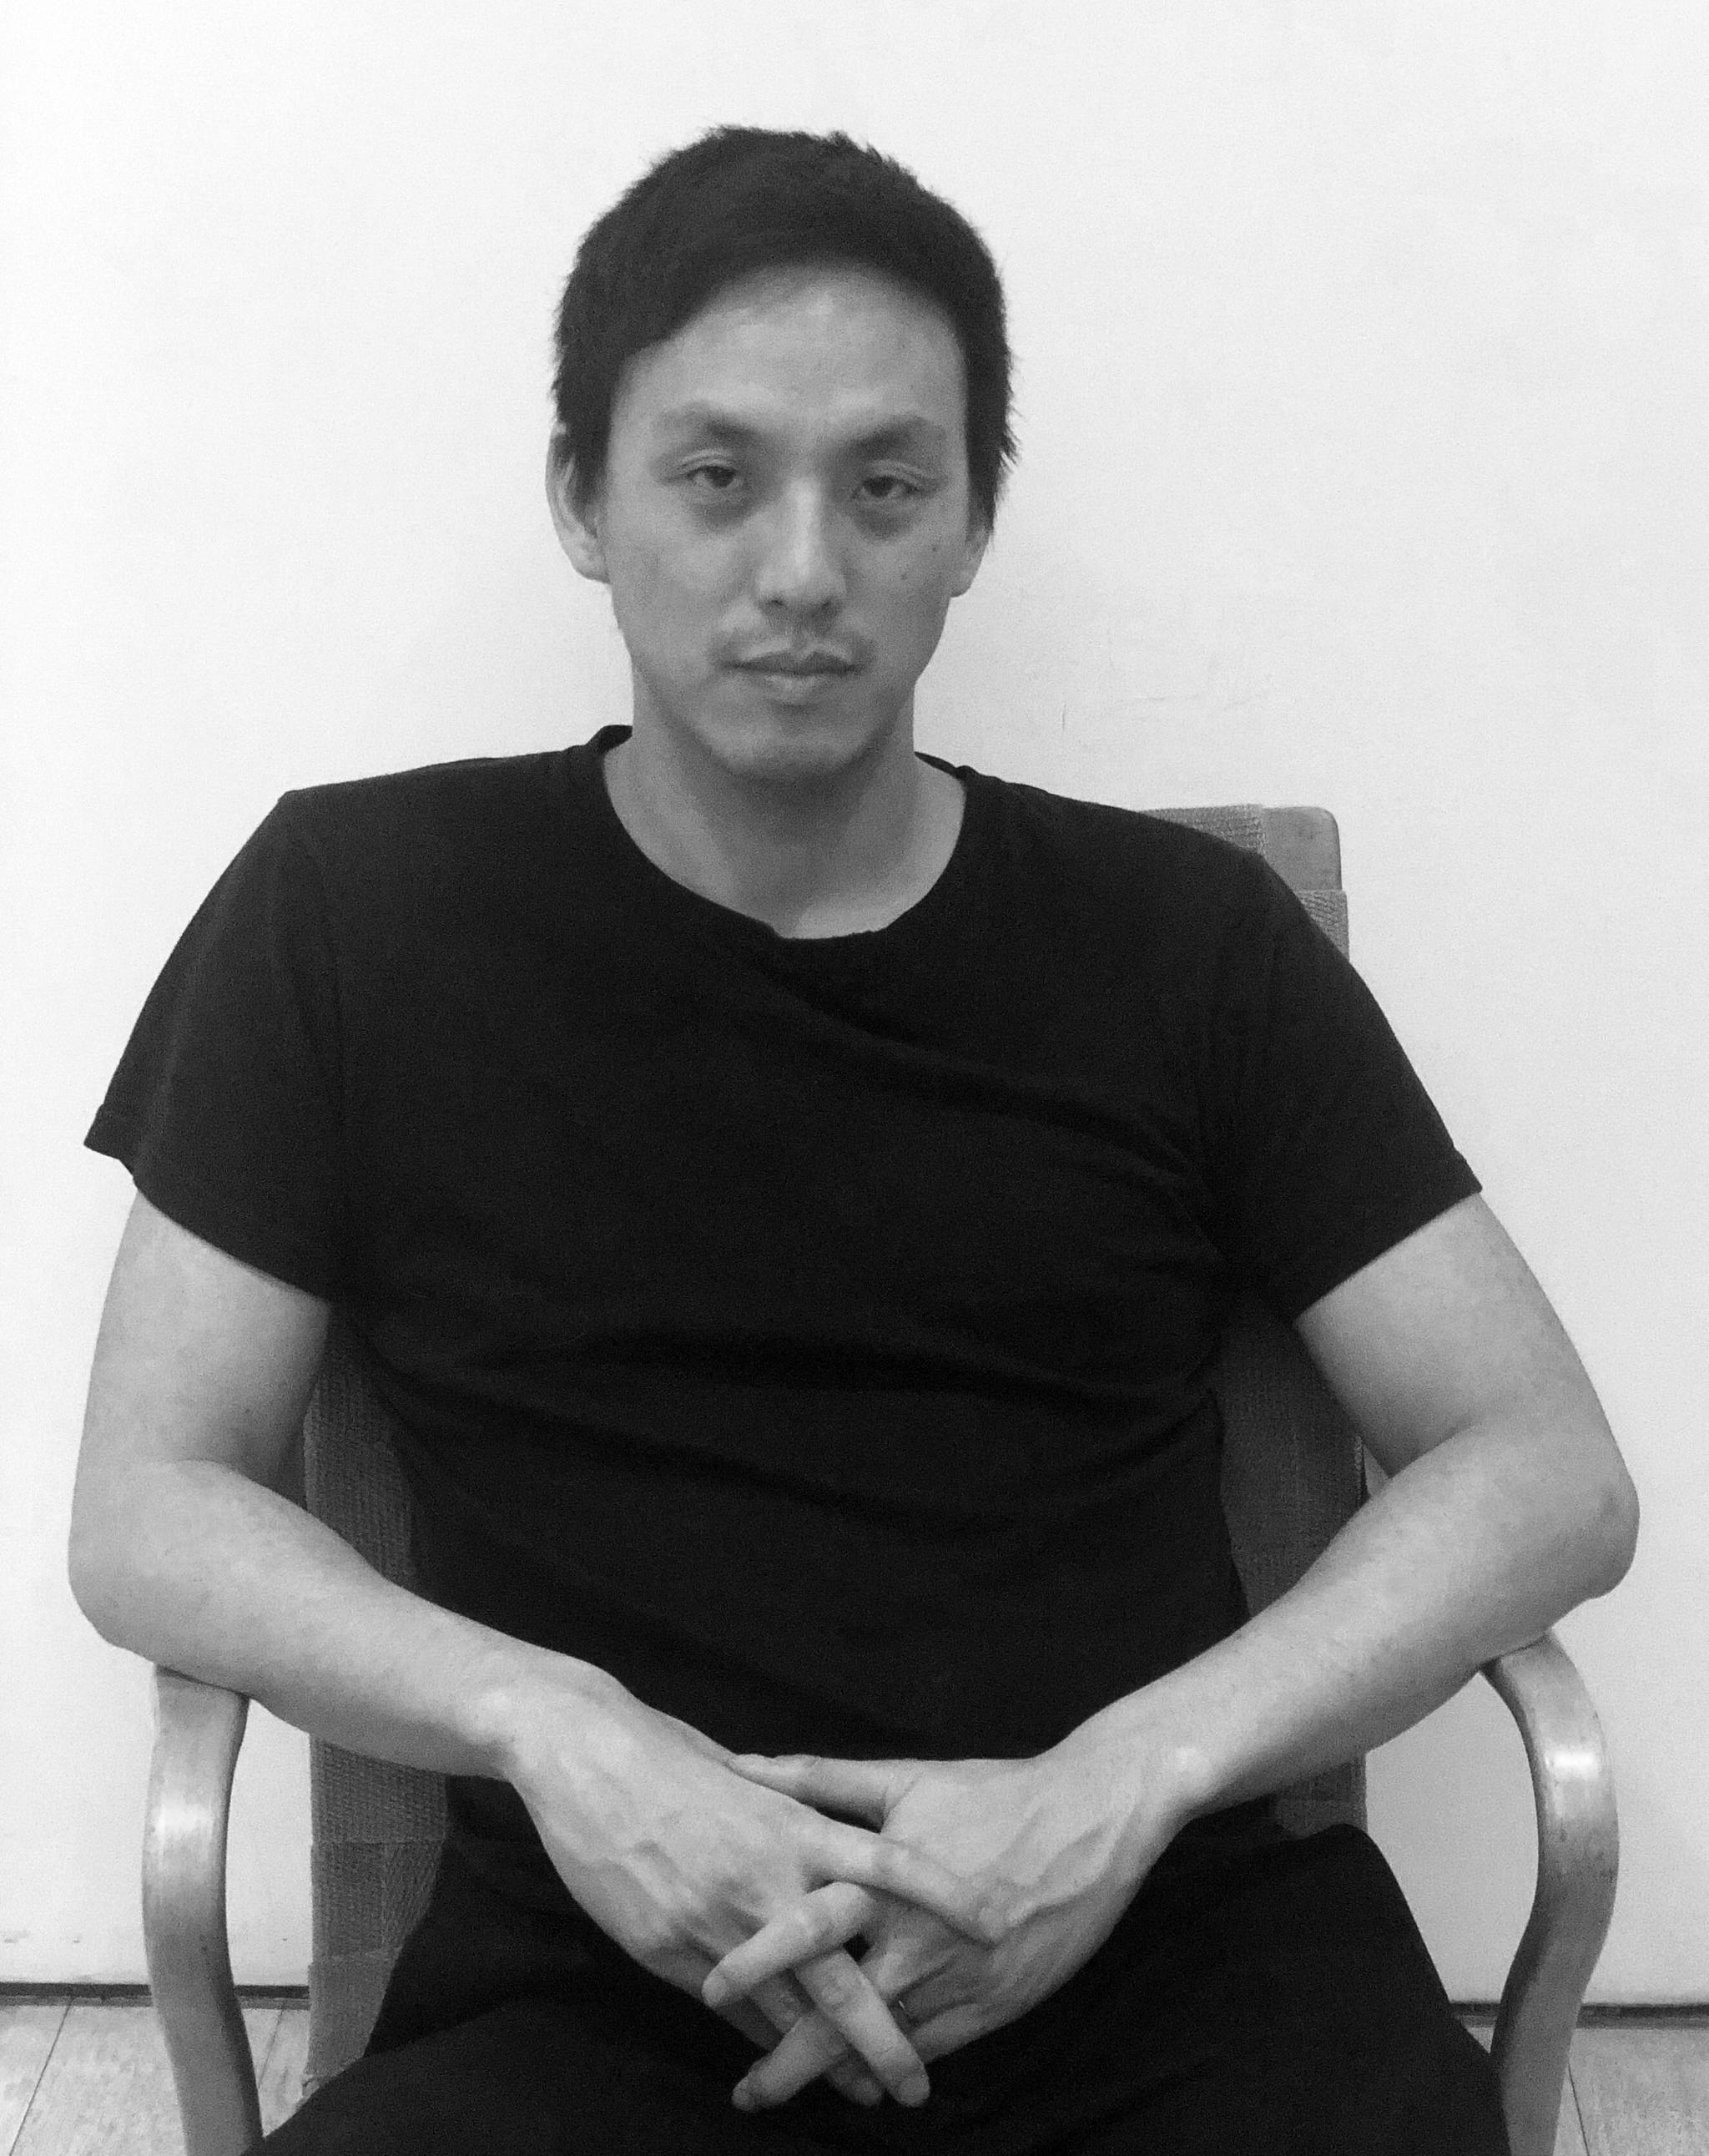 The artist Ian Cheng in a black t-shirt and pants, sitting in a chair with hands crossed in his lap